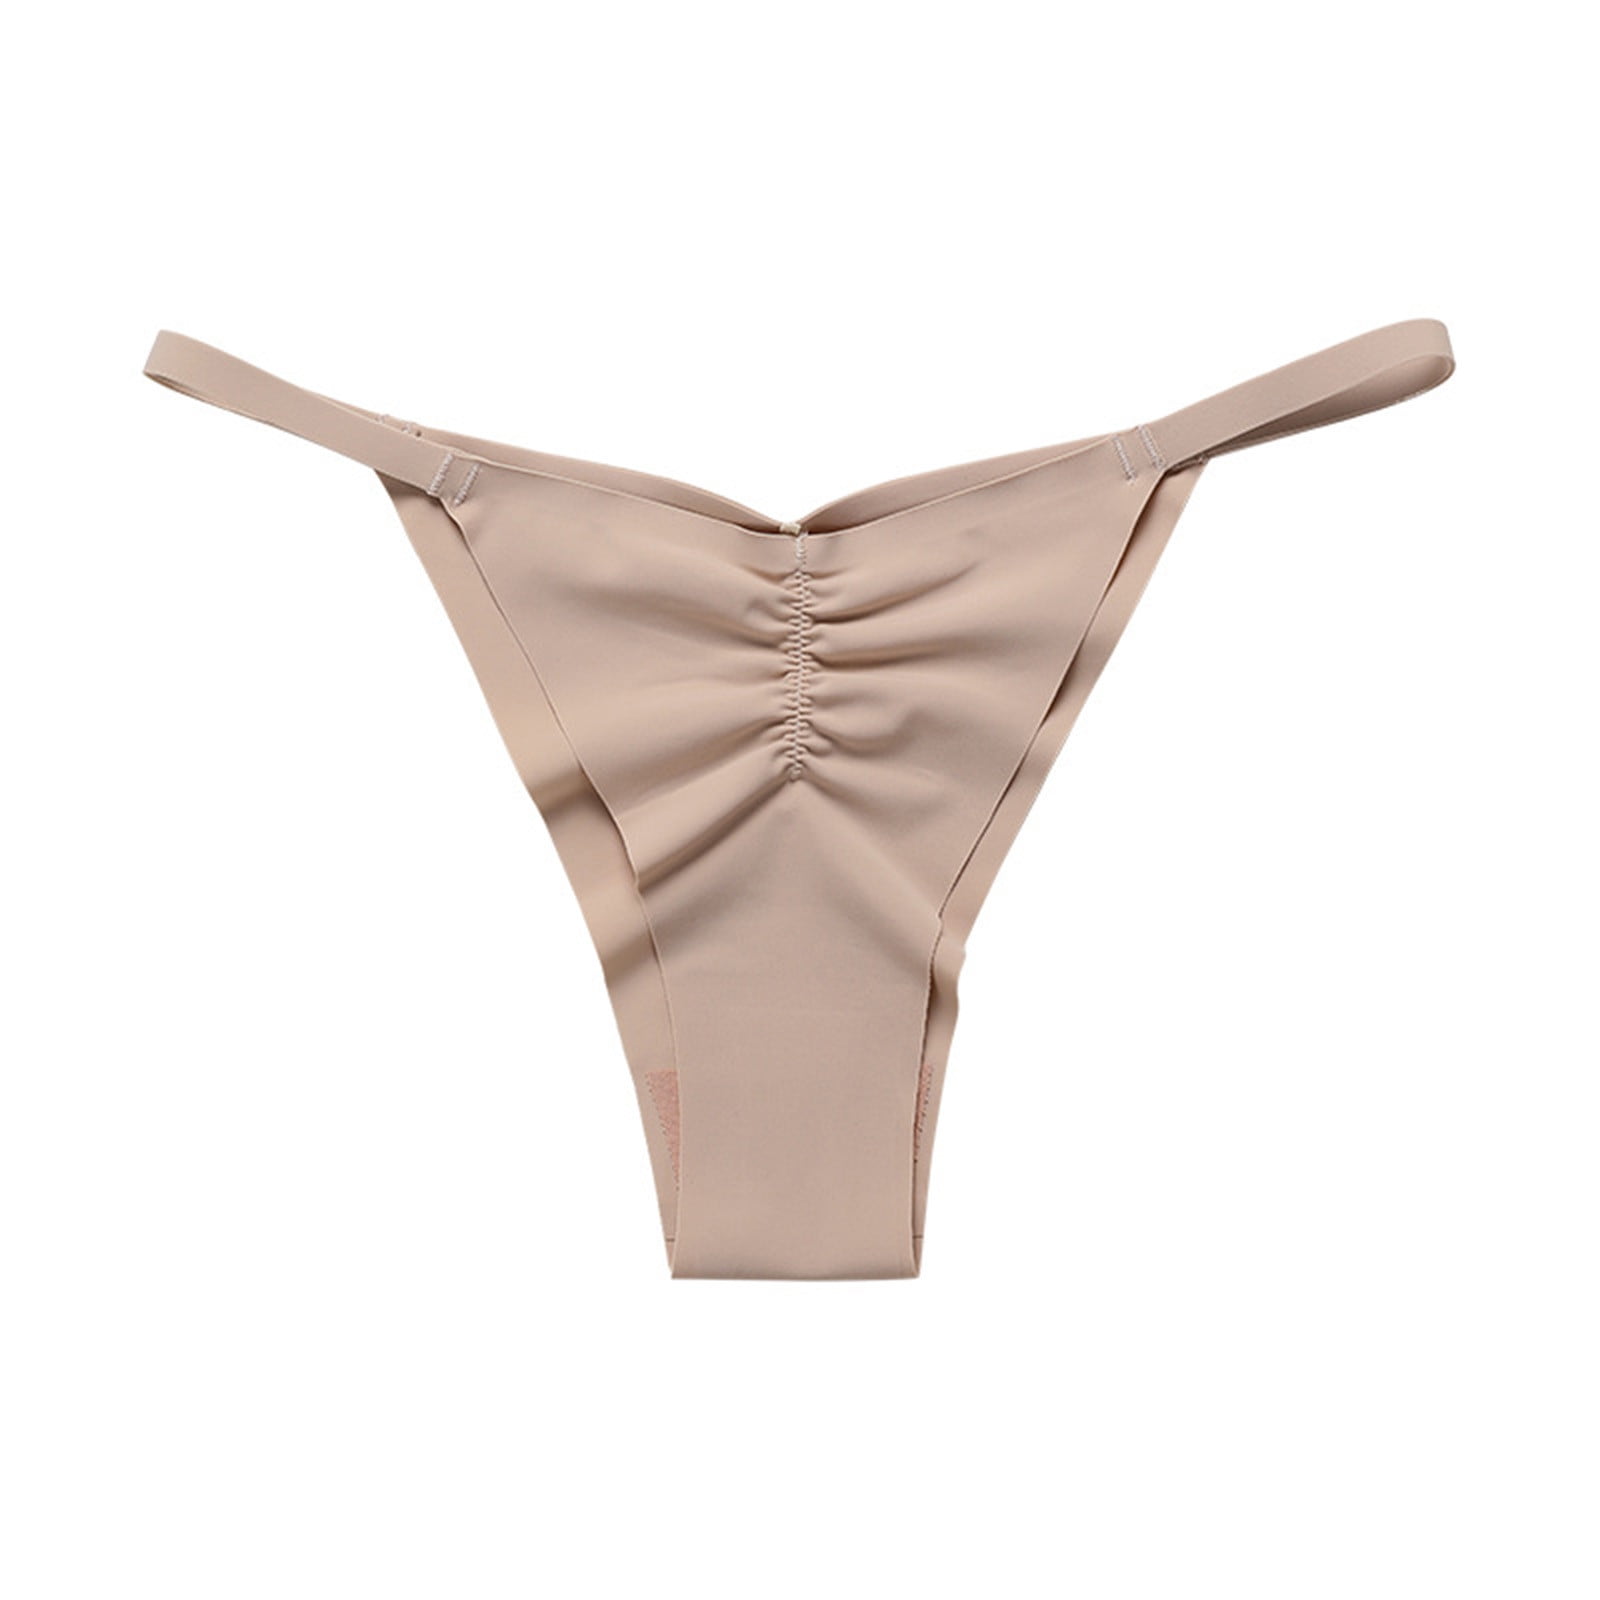 Lopecy-Sta Women's Sexy Satin Panties Mid Waist Wavy Cotton Crotch Briefs  Savings Clearance Thongs for Women Pack Mother's Day Gifts Beige 